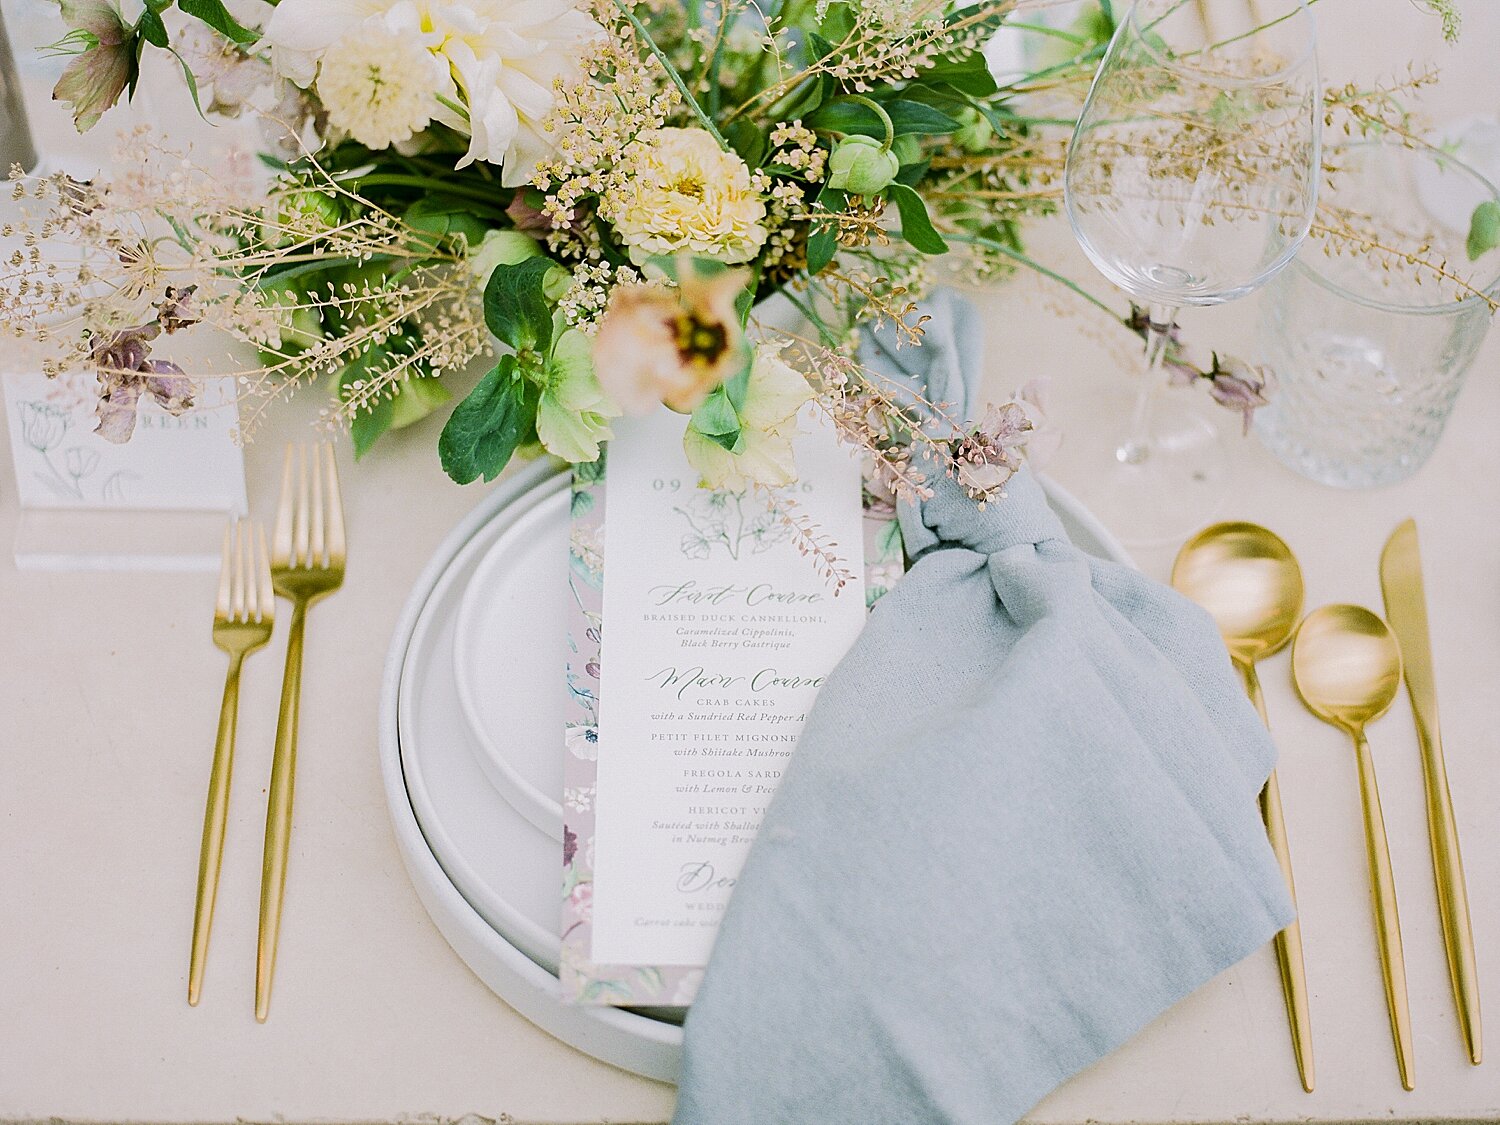 place settings with blue and gold details | Asher Gardner Photography | Intimate Ceremony in DUMBO New York